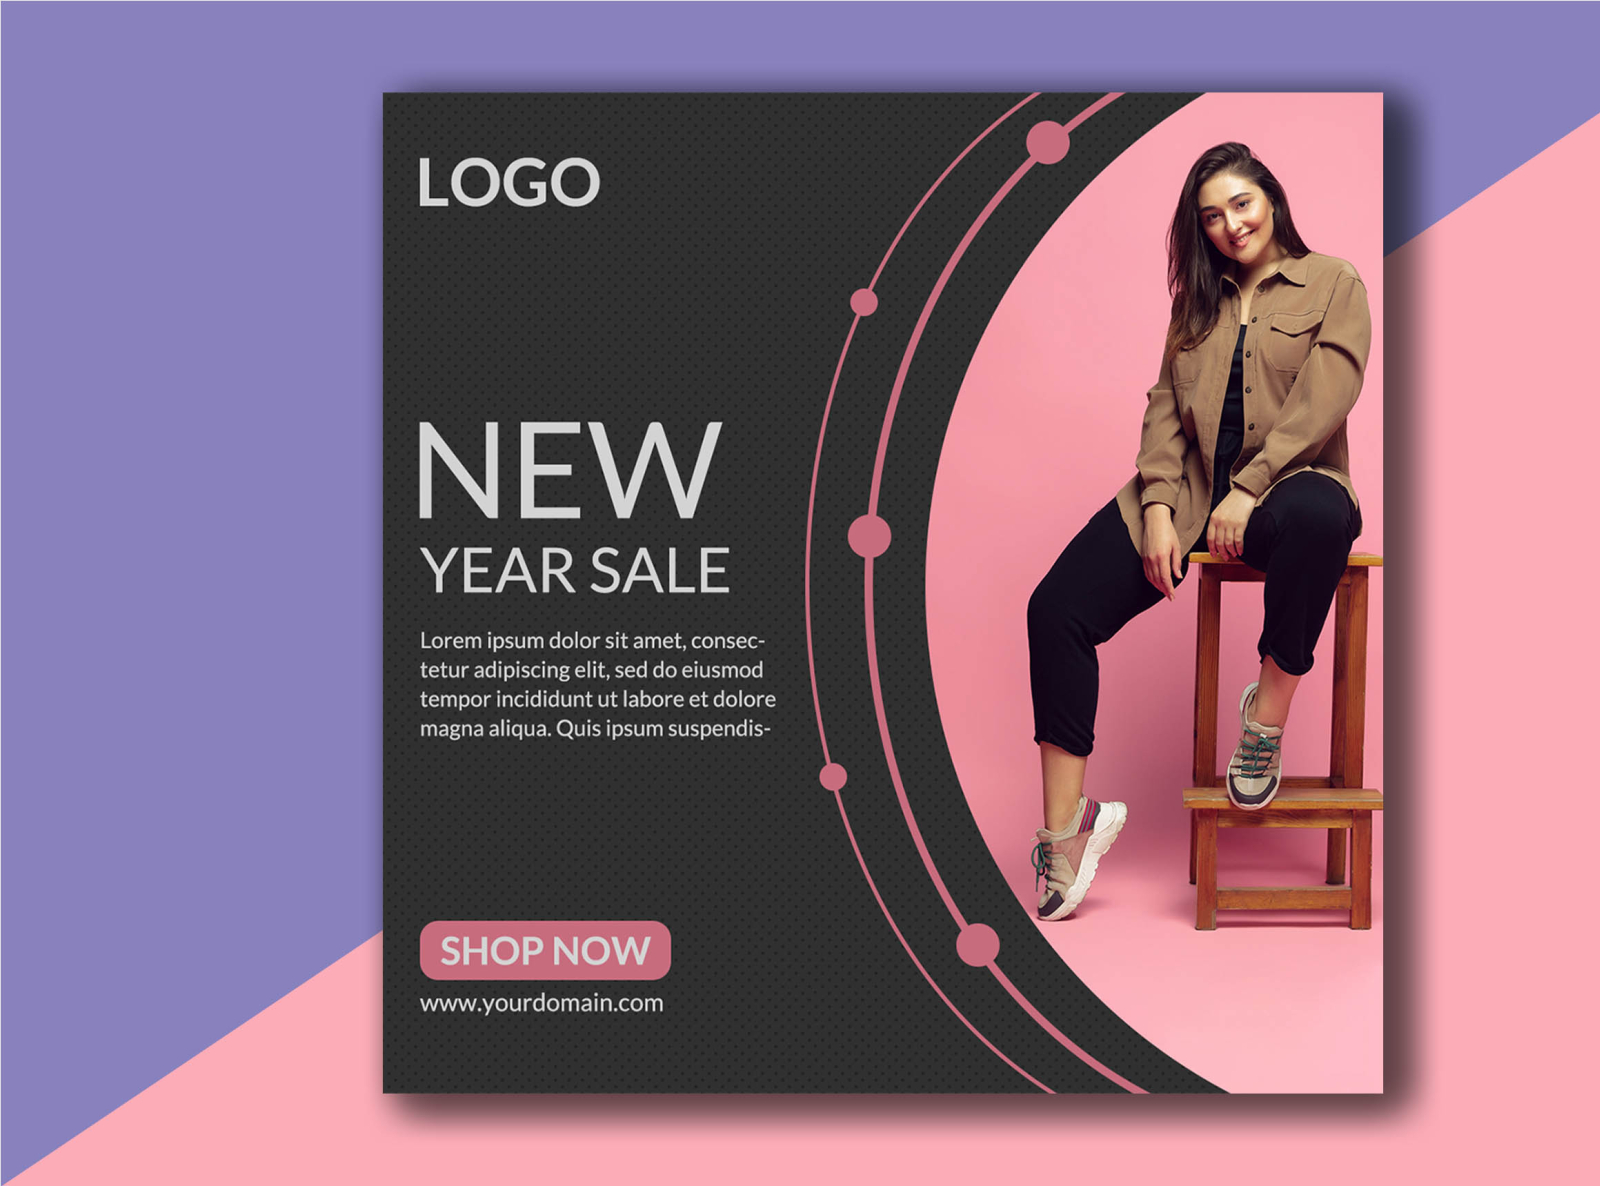 Download Social Media Advertisement Banner Free Psd Template By Design Idea 4u On Dribbble Yellowimages Mockups